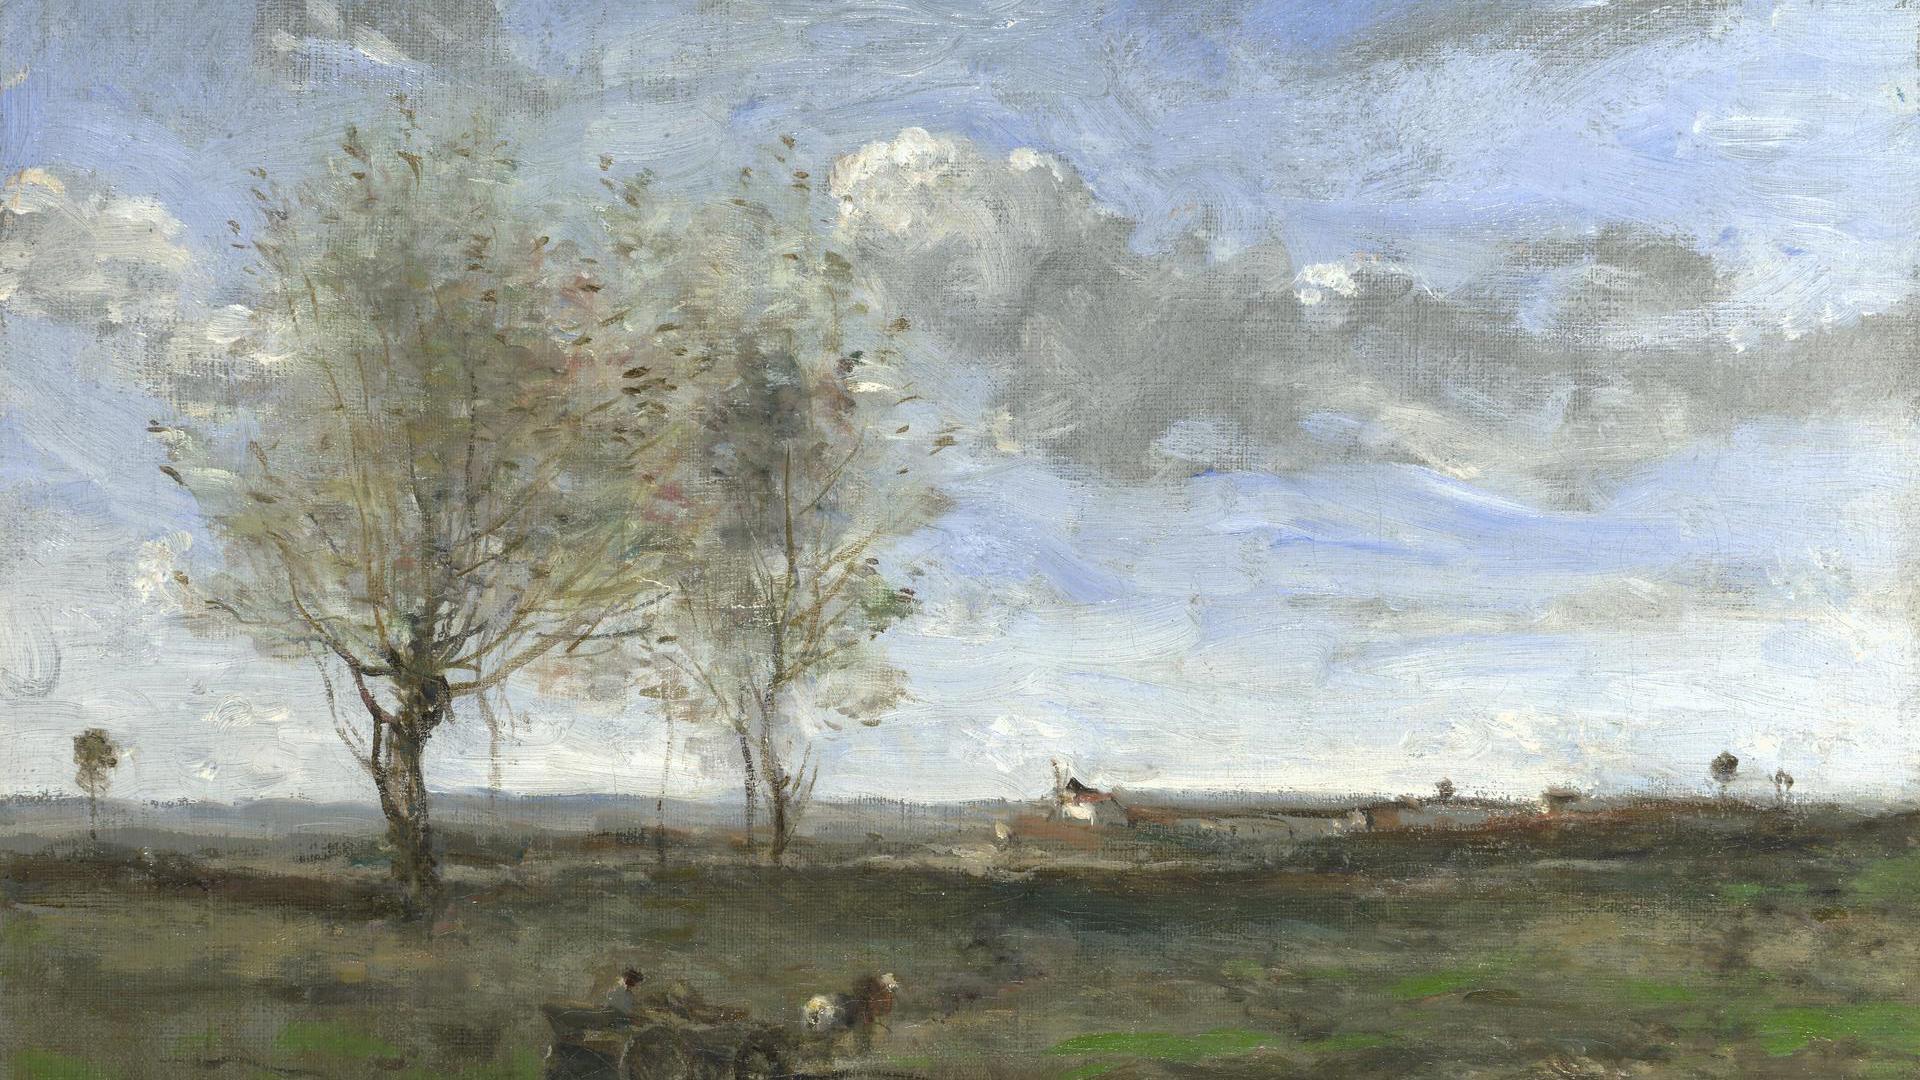 A Wagon in the Plains of Artois by Jean-Baptiste-Camille Corot